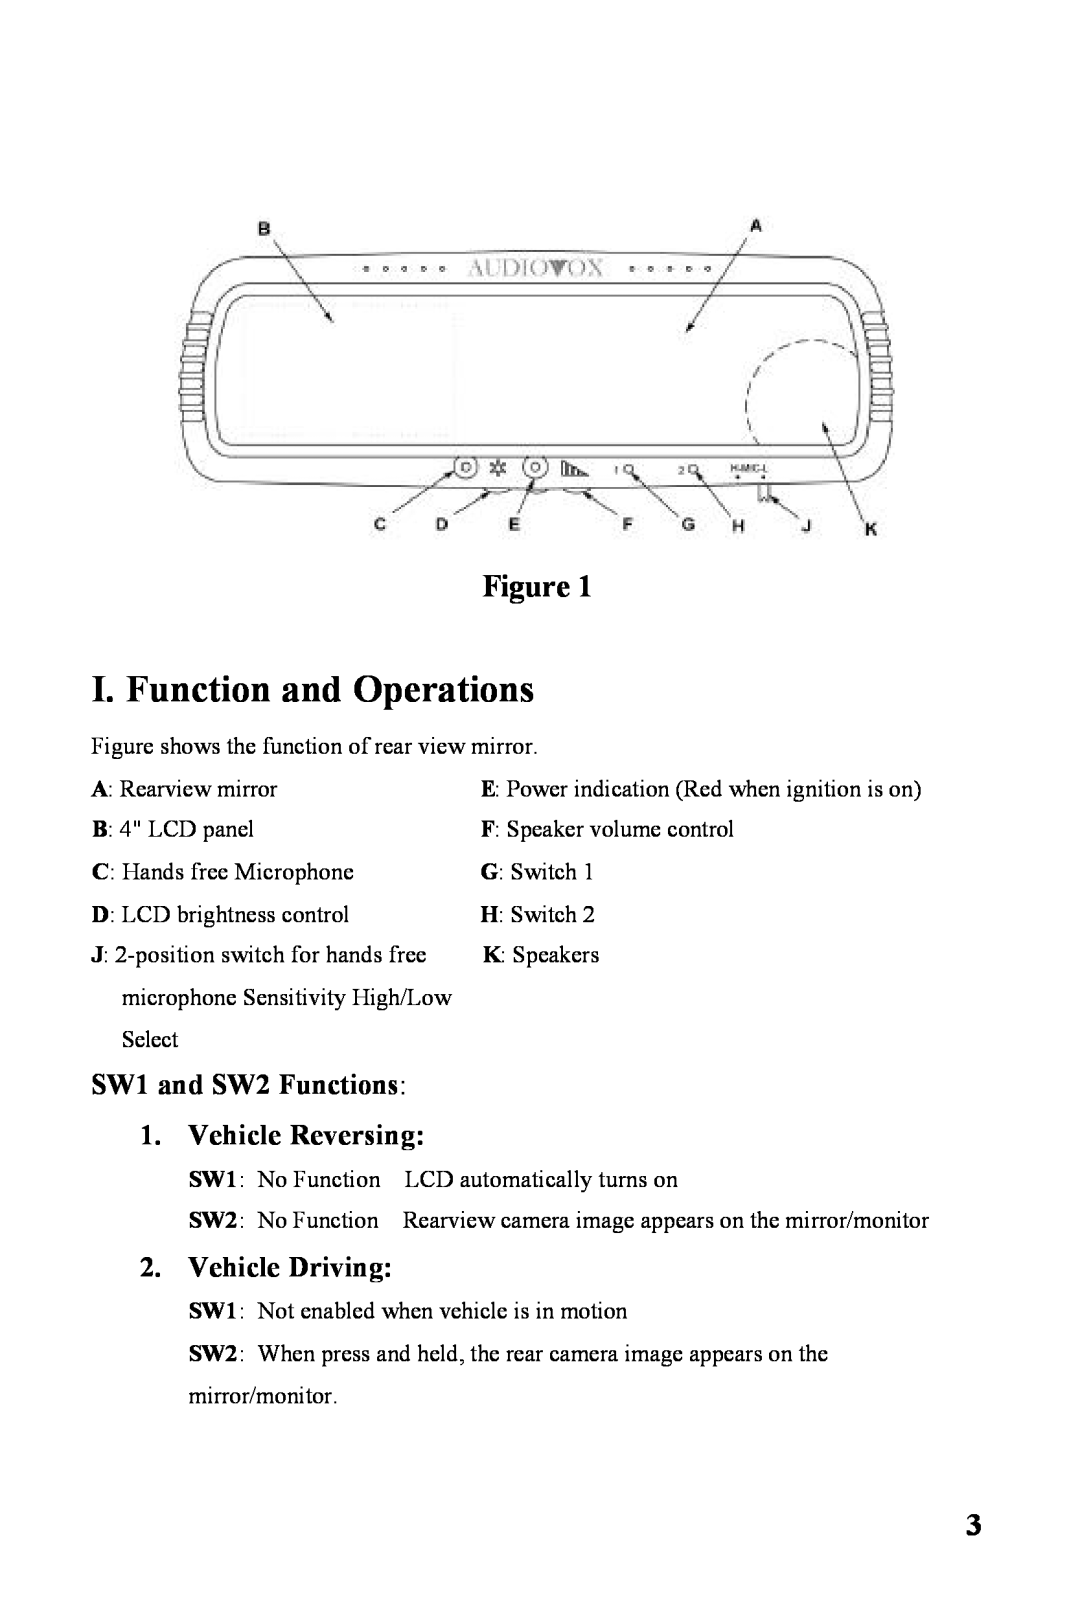 Audiovox RVMPKG1 owner manual SW1 and SW2 Functions, Vehicle Reversing, Vehicle Driving, I. Function and Operations 